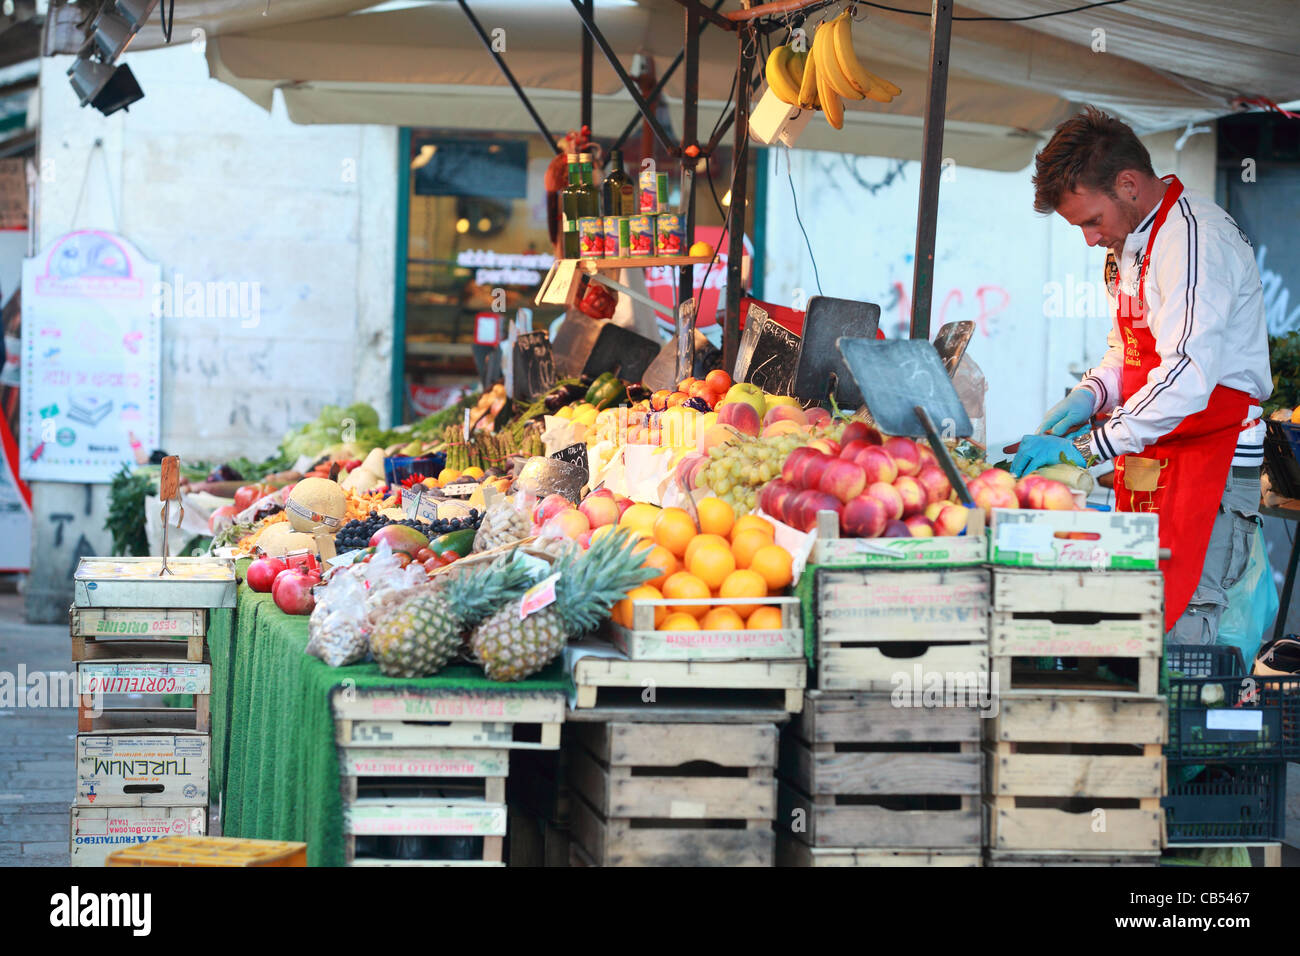 A fruiterer with his stall in the street in Venice, Italy. Street stalls and open-air markets are a feature of life in the city. Stock Photo